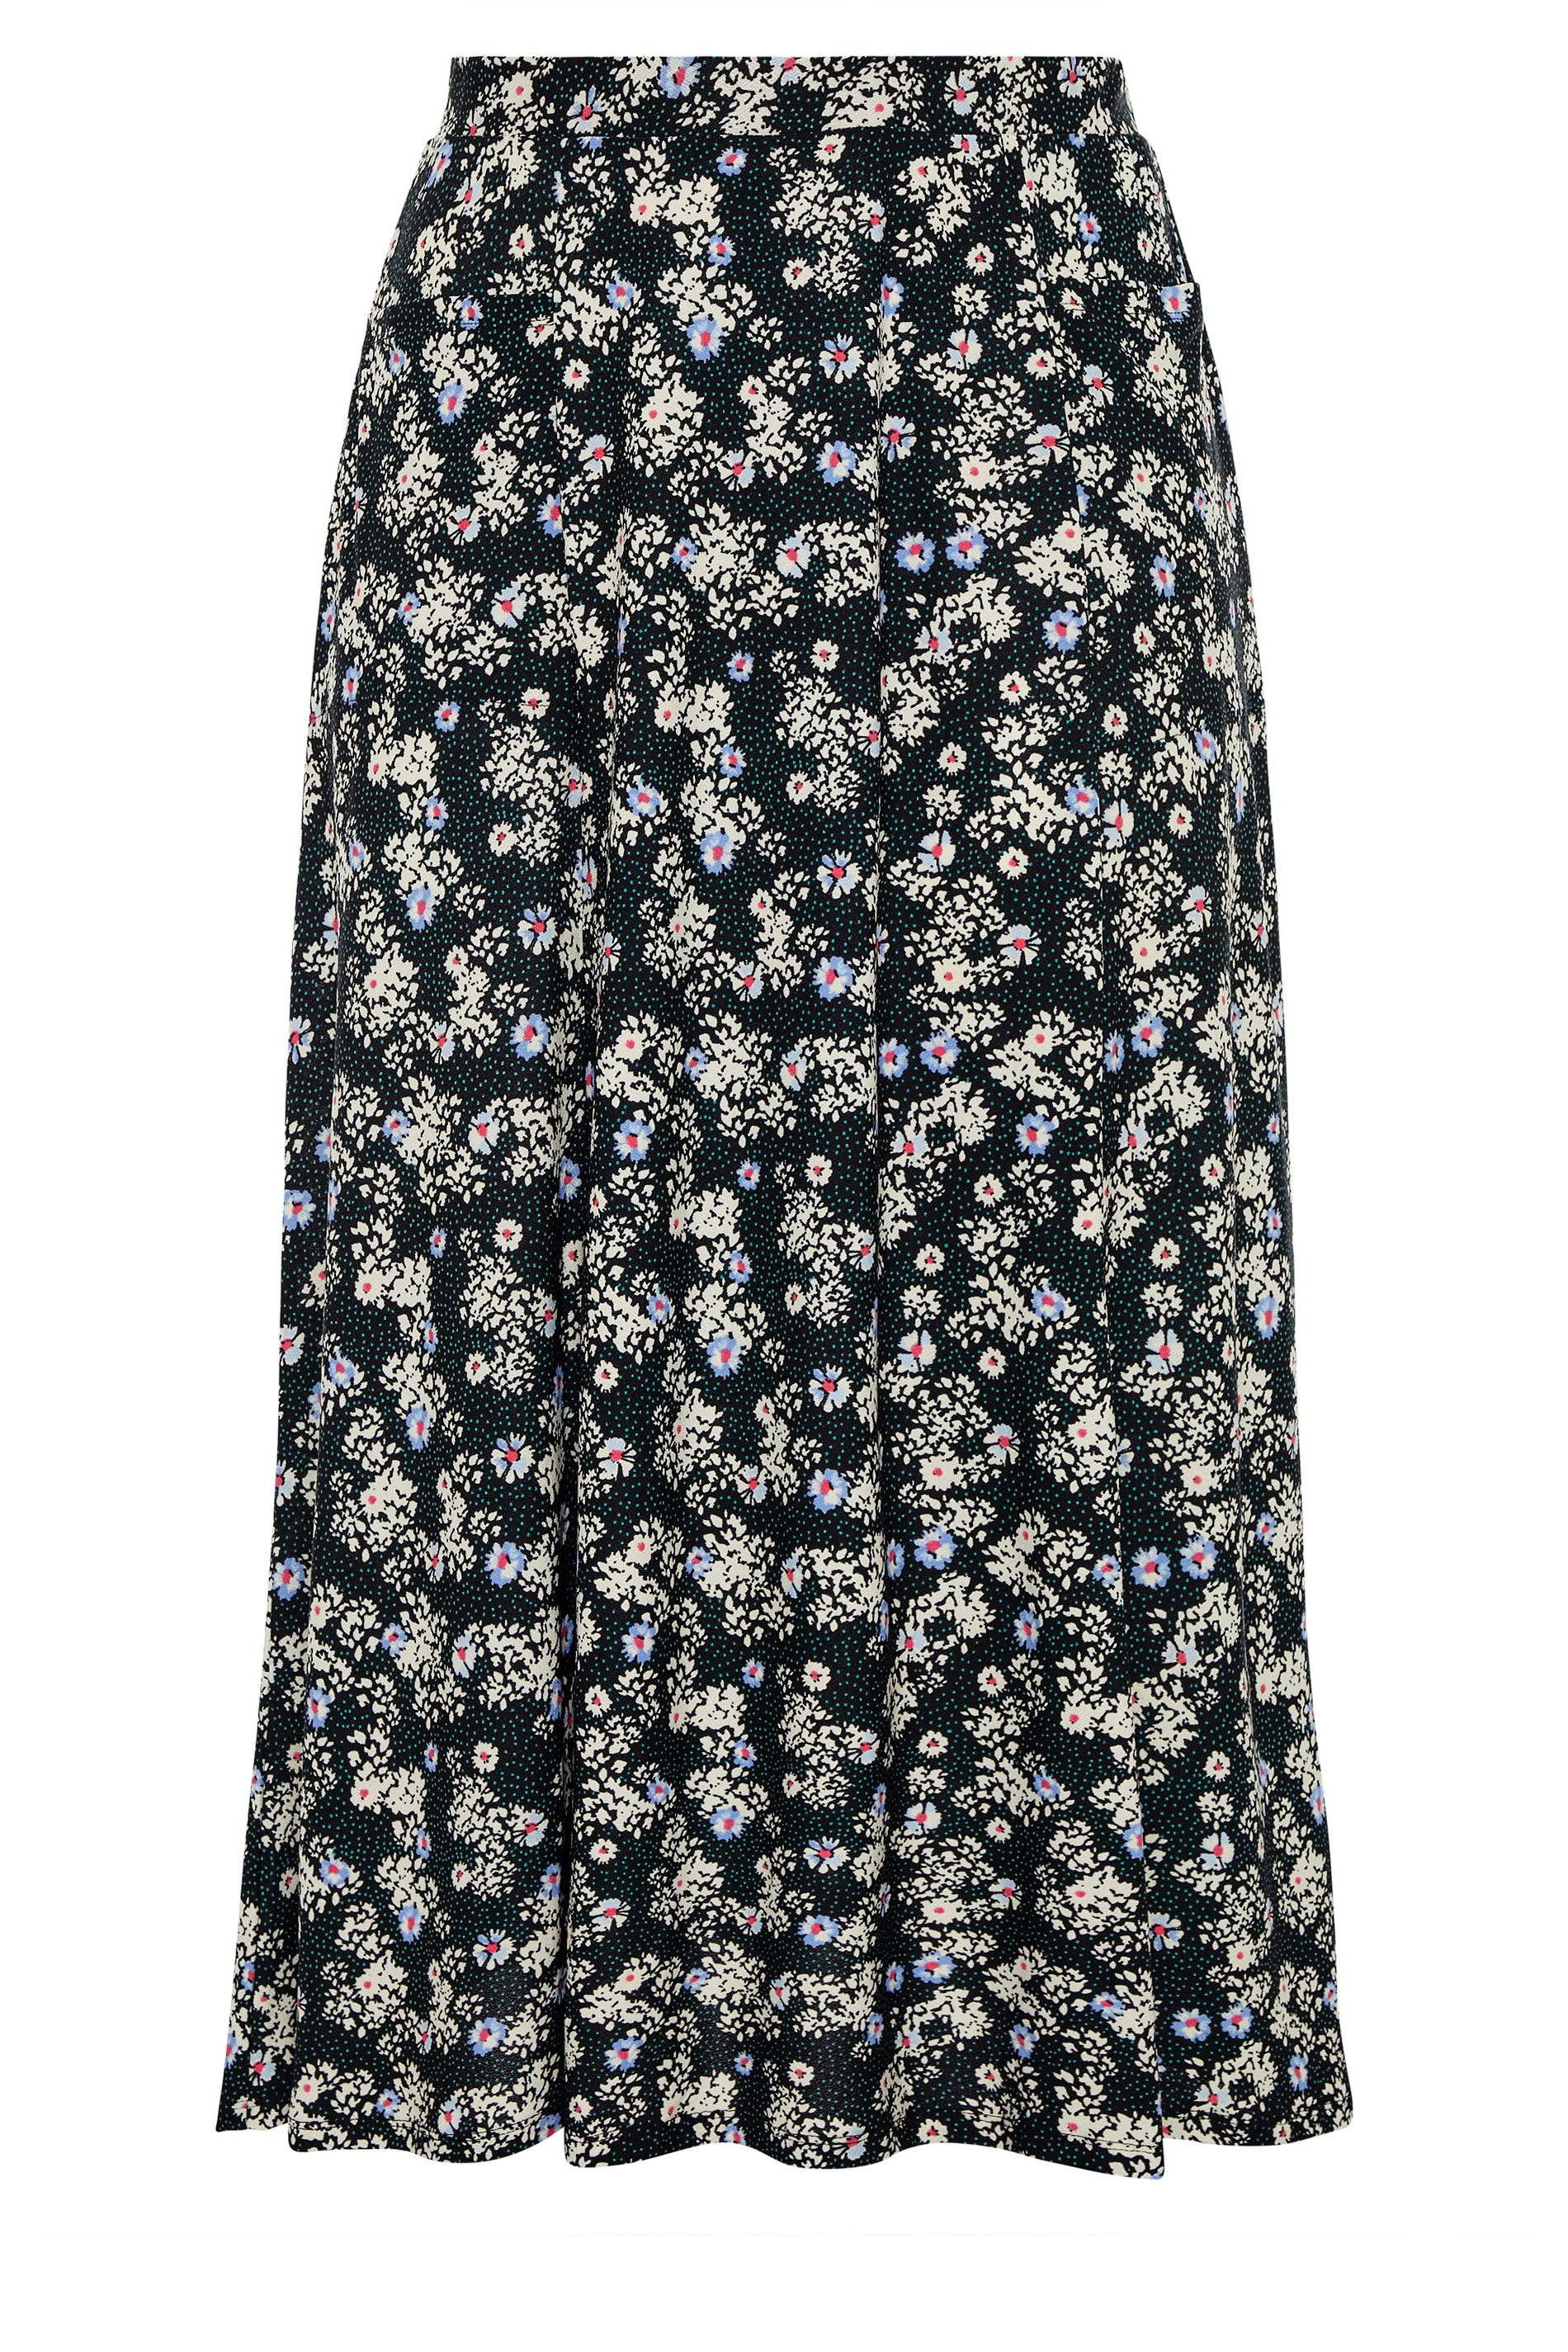 Black Floral Print Pocket Maxi Skirt | Yours Clothing